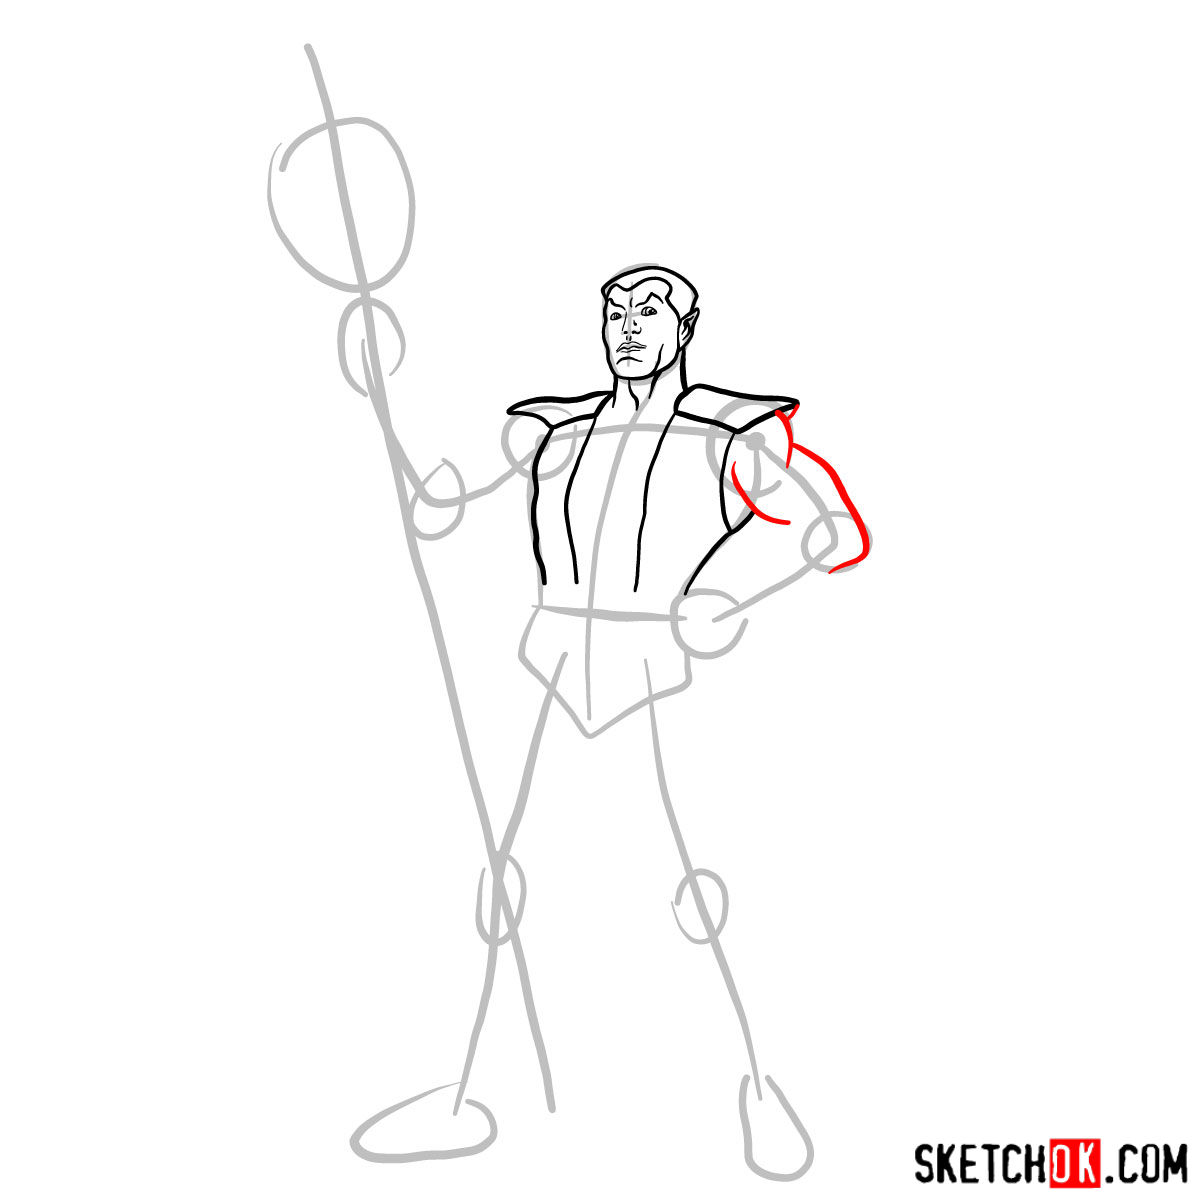 How to draw Namor the Sub-Mariner from Marvel Comics - step 06